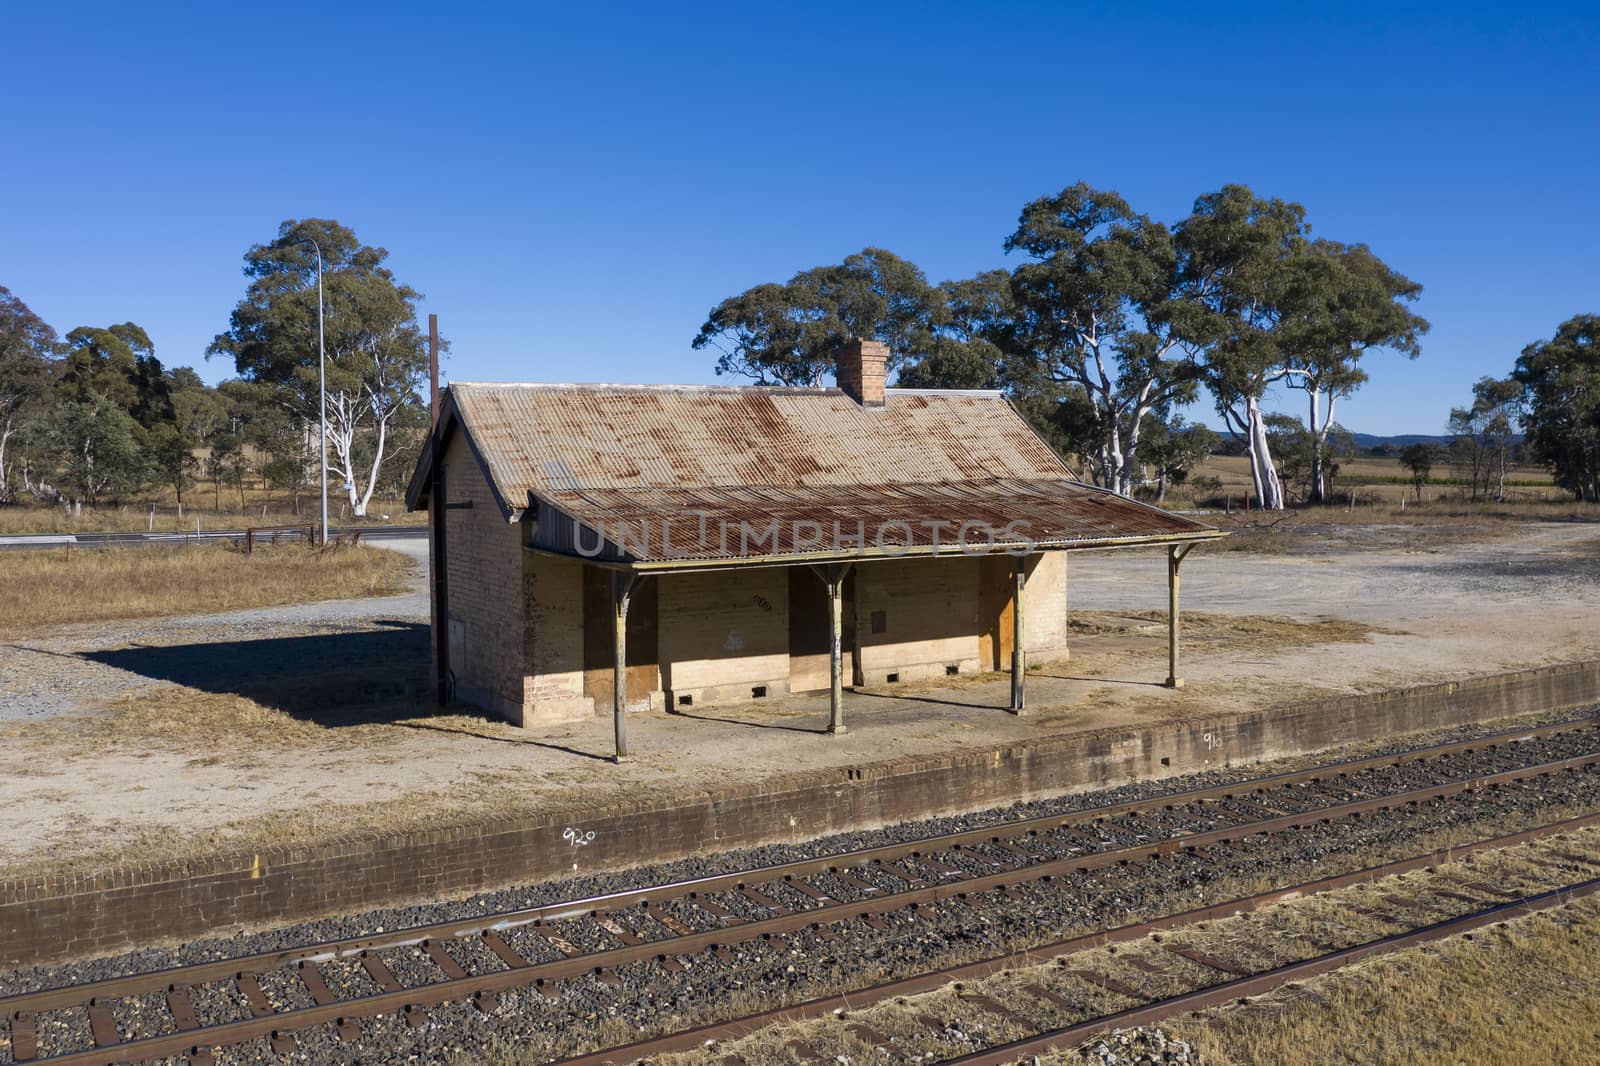 Old train station near a railway track in rural New South Wales, Australia.